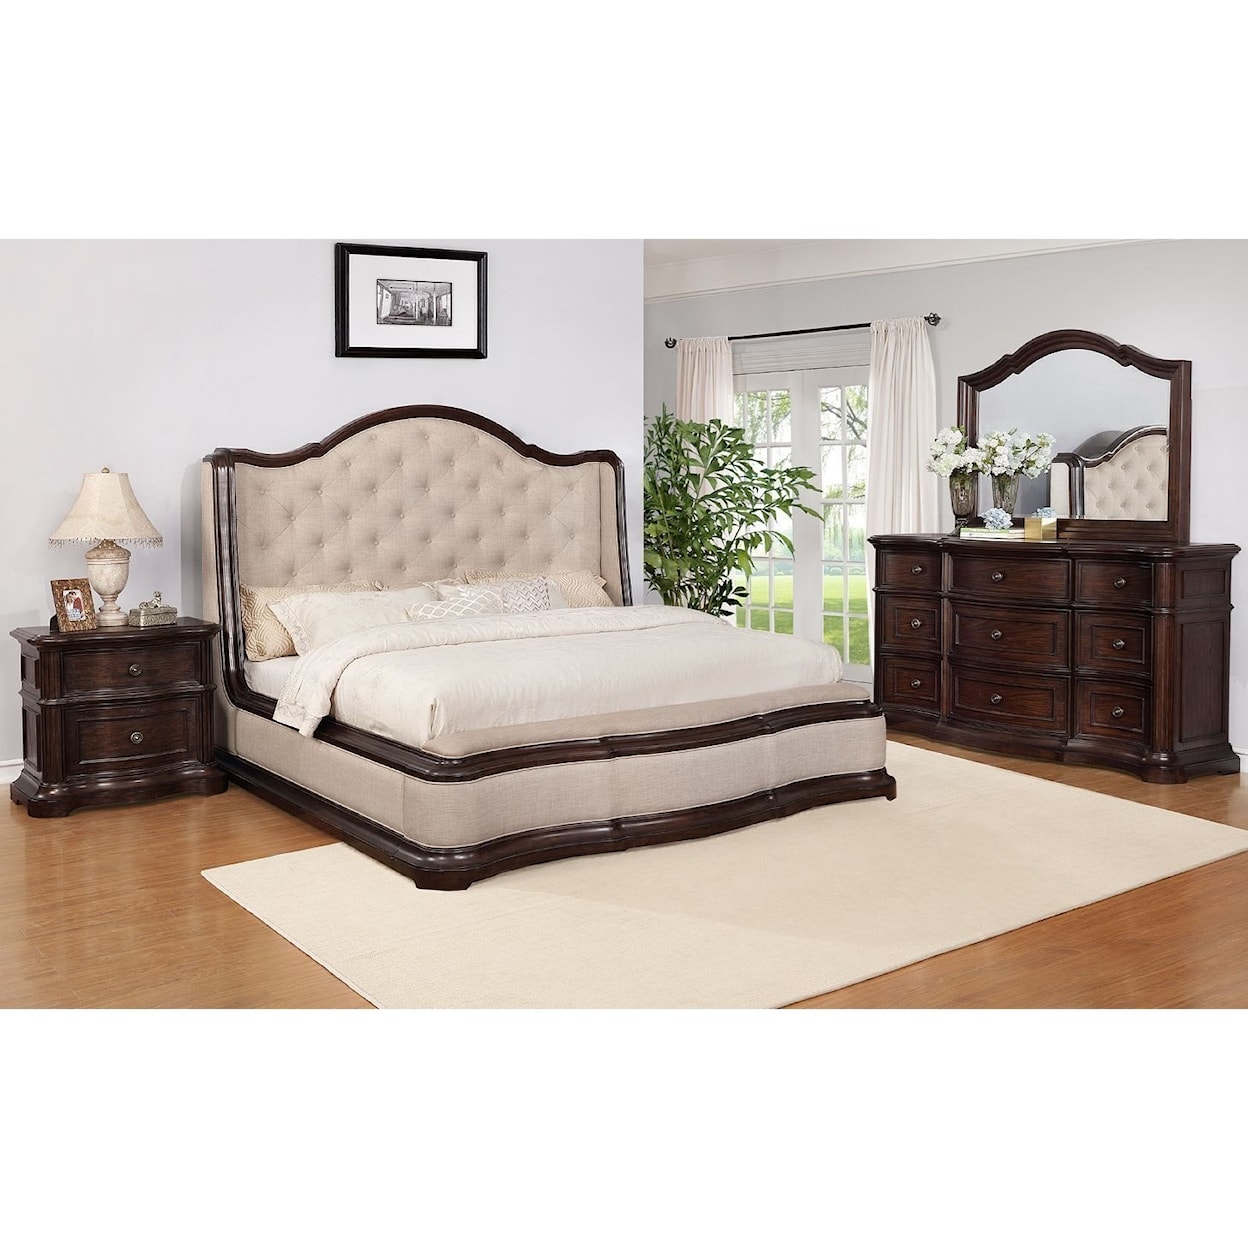 Avalon Furniture B00169 Queen Bedroom Group